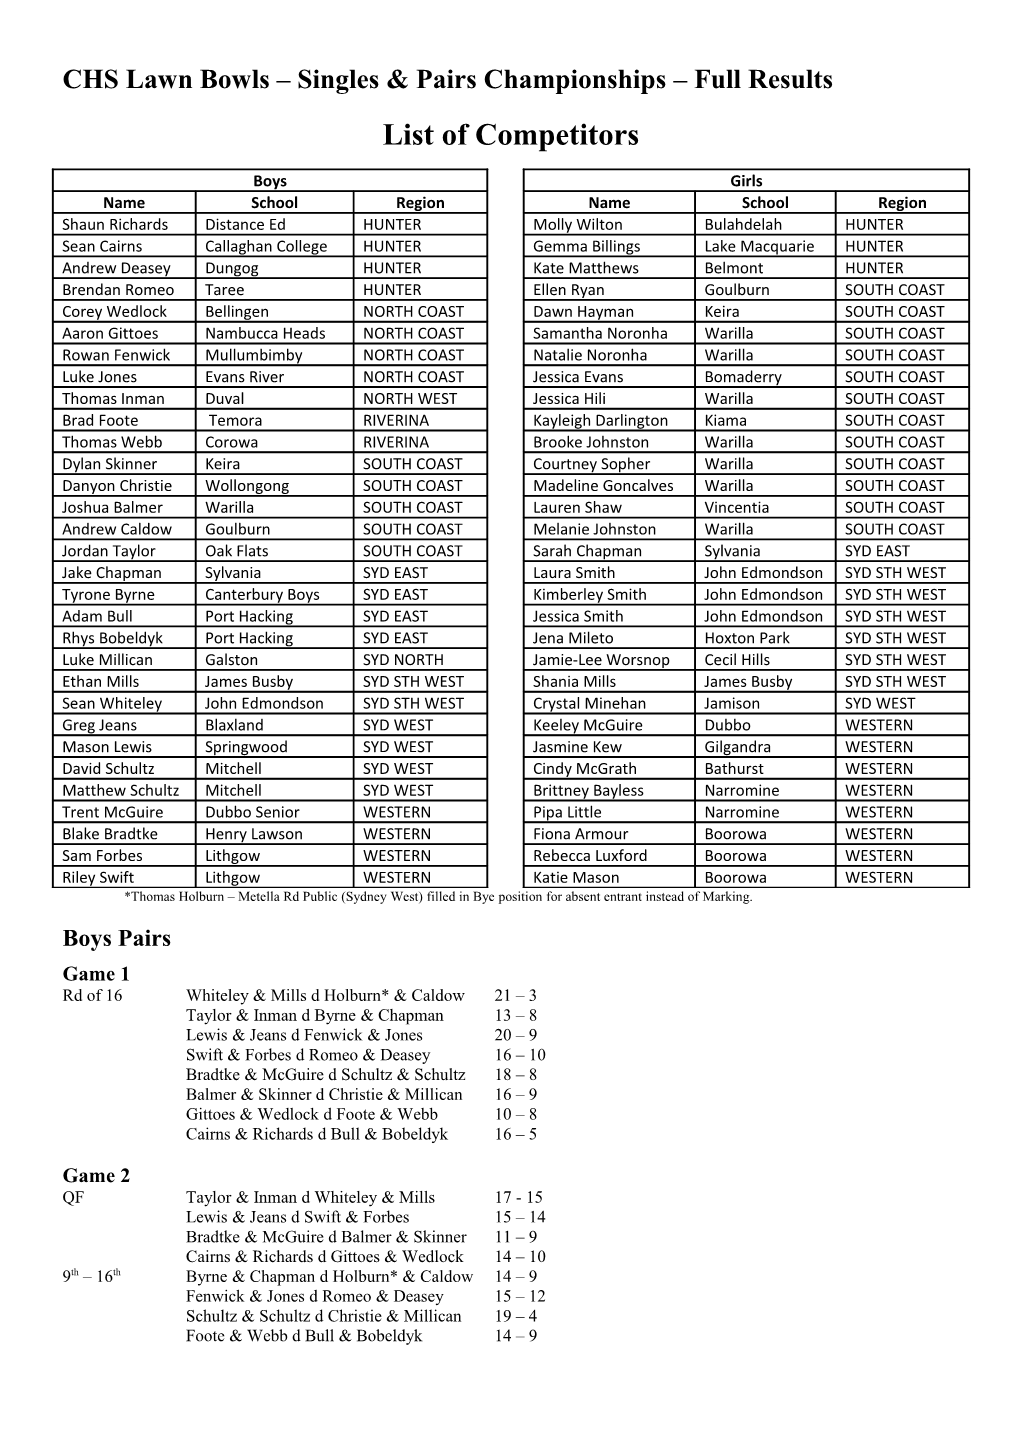 CHS Lawn Bowls Singles & Pairs Championships Full Results